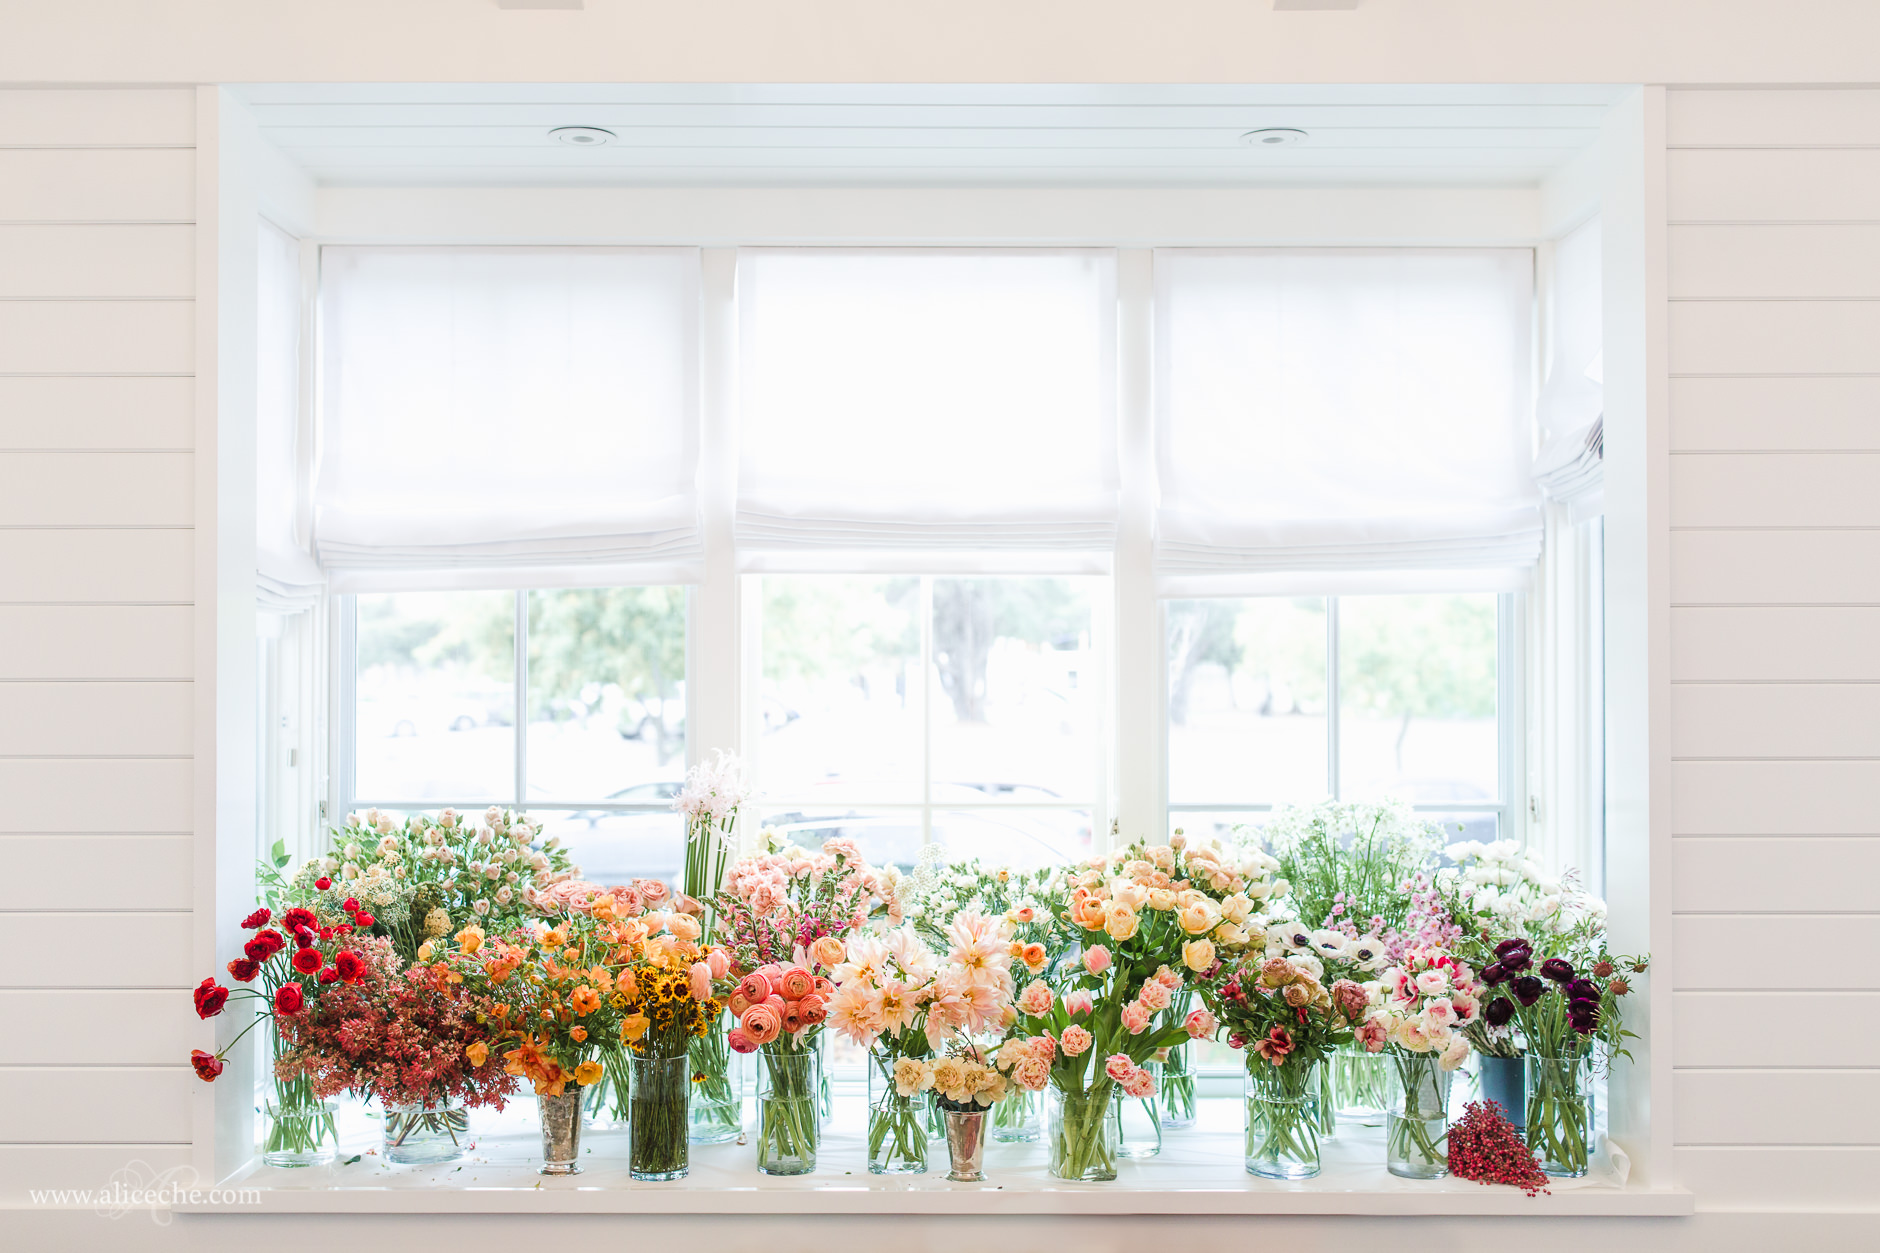 Flowers in the window for Color Theory and Bouquets with Gabriela of La Musa De Las Floras